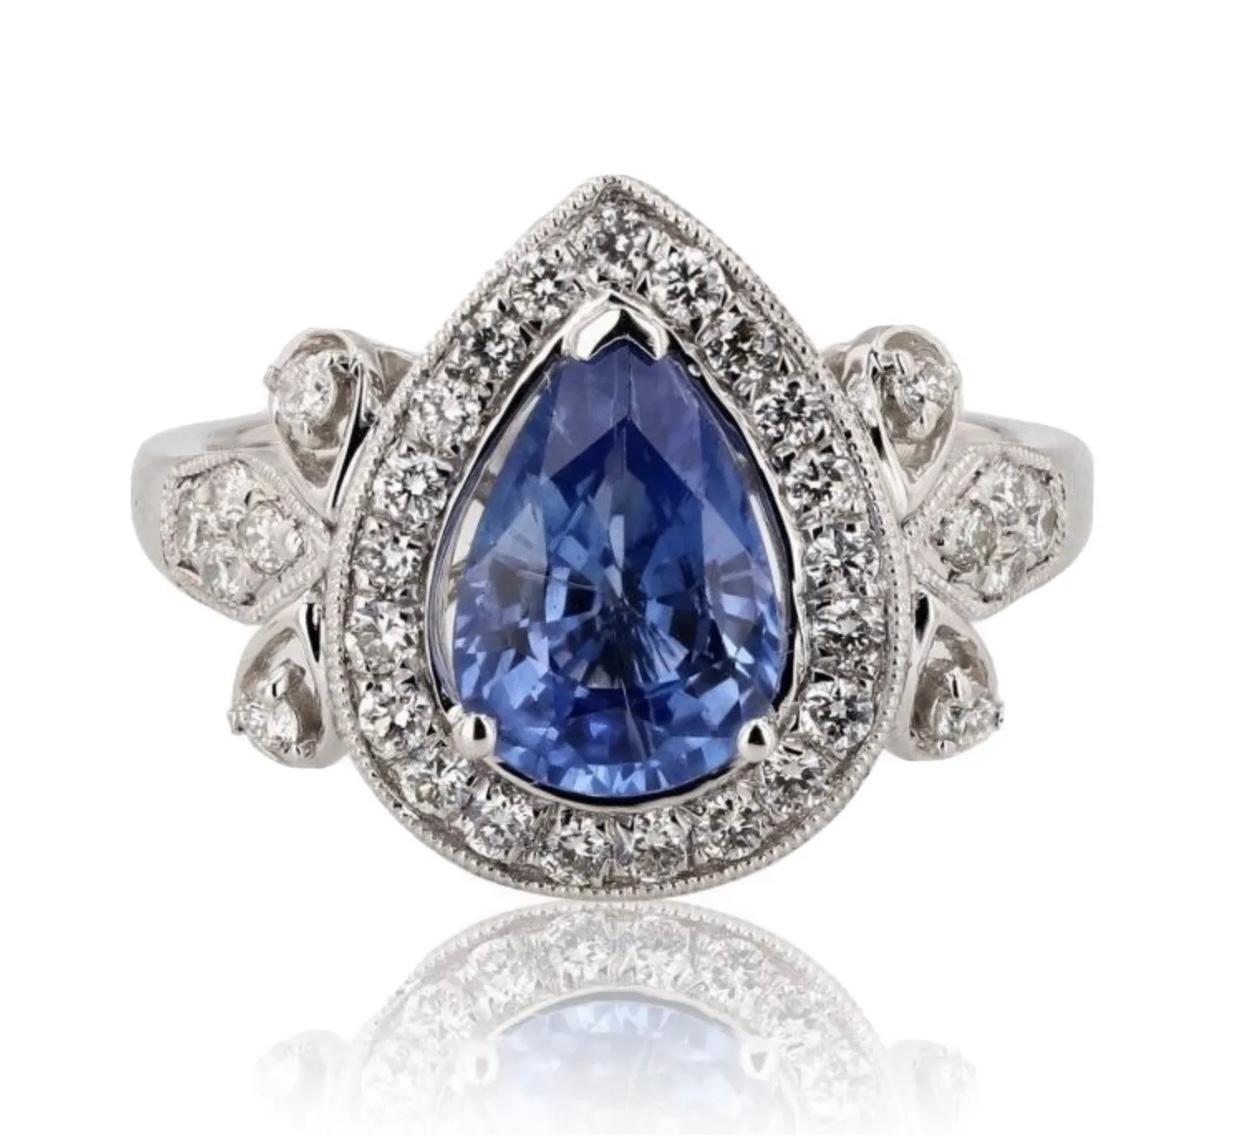 Genuine solid platinum 2.02ct. sapphire & .45ct. diamond ring in brand new condition, appraised at $12,295 (appraisal included). This is gorgeous engagement ring or statement piece! Size 7, weighs 6.80g - this ring is resizable.

Additional